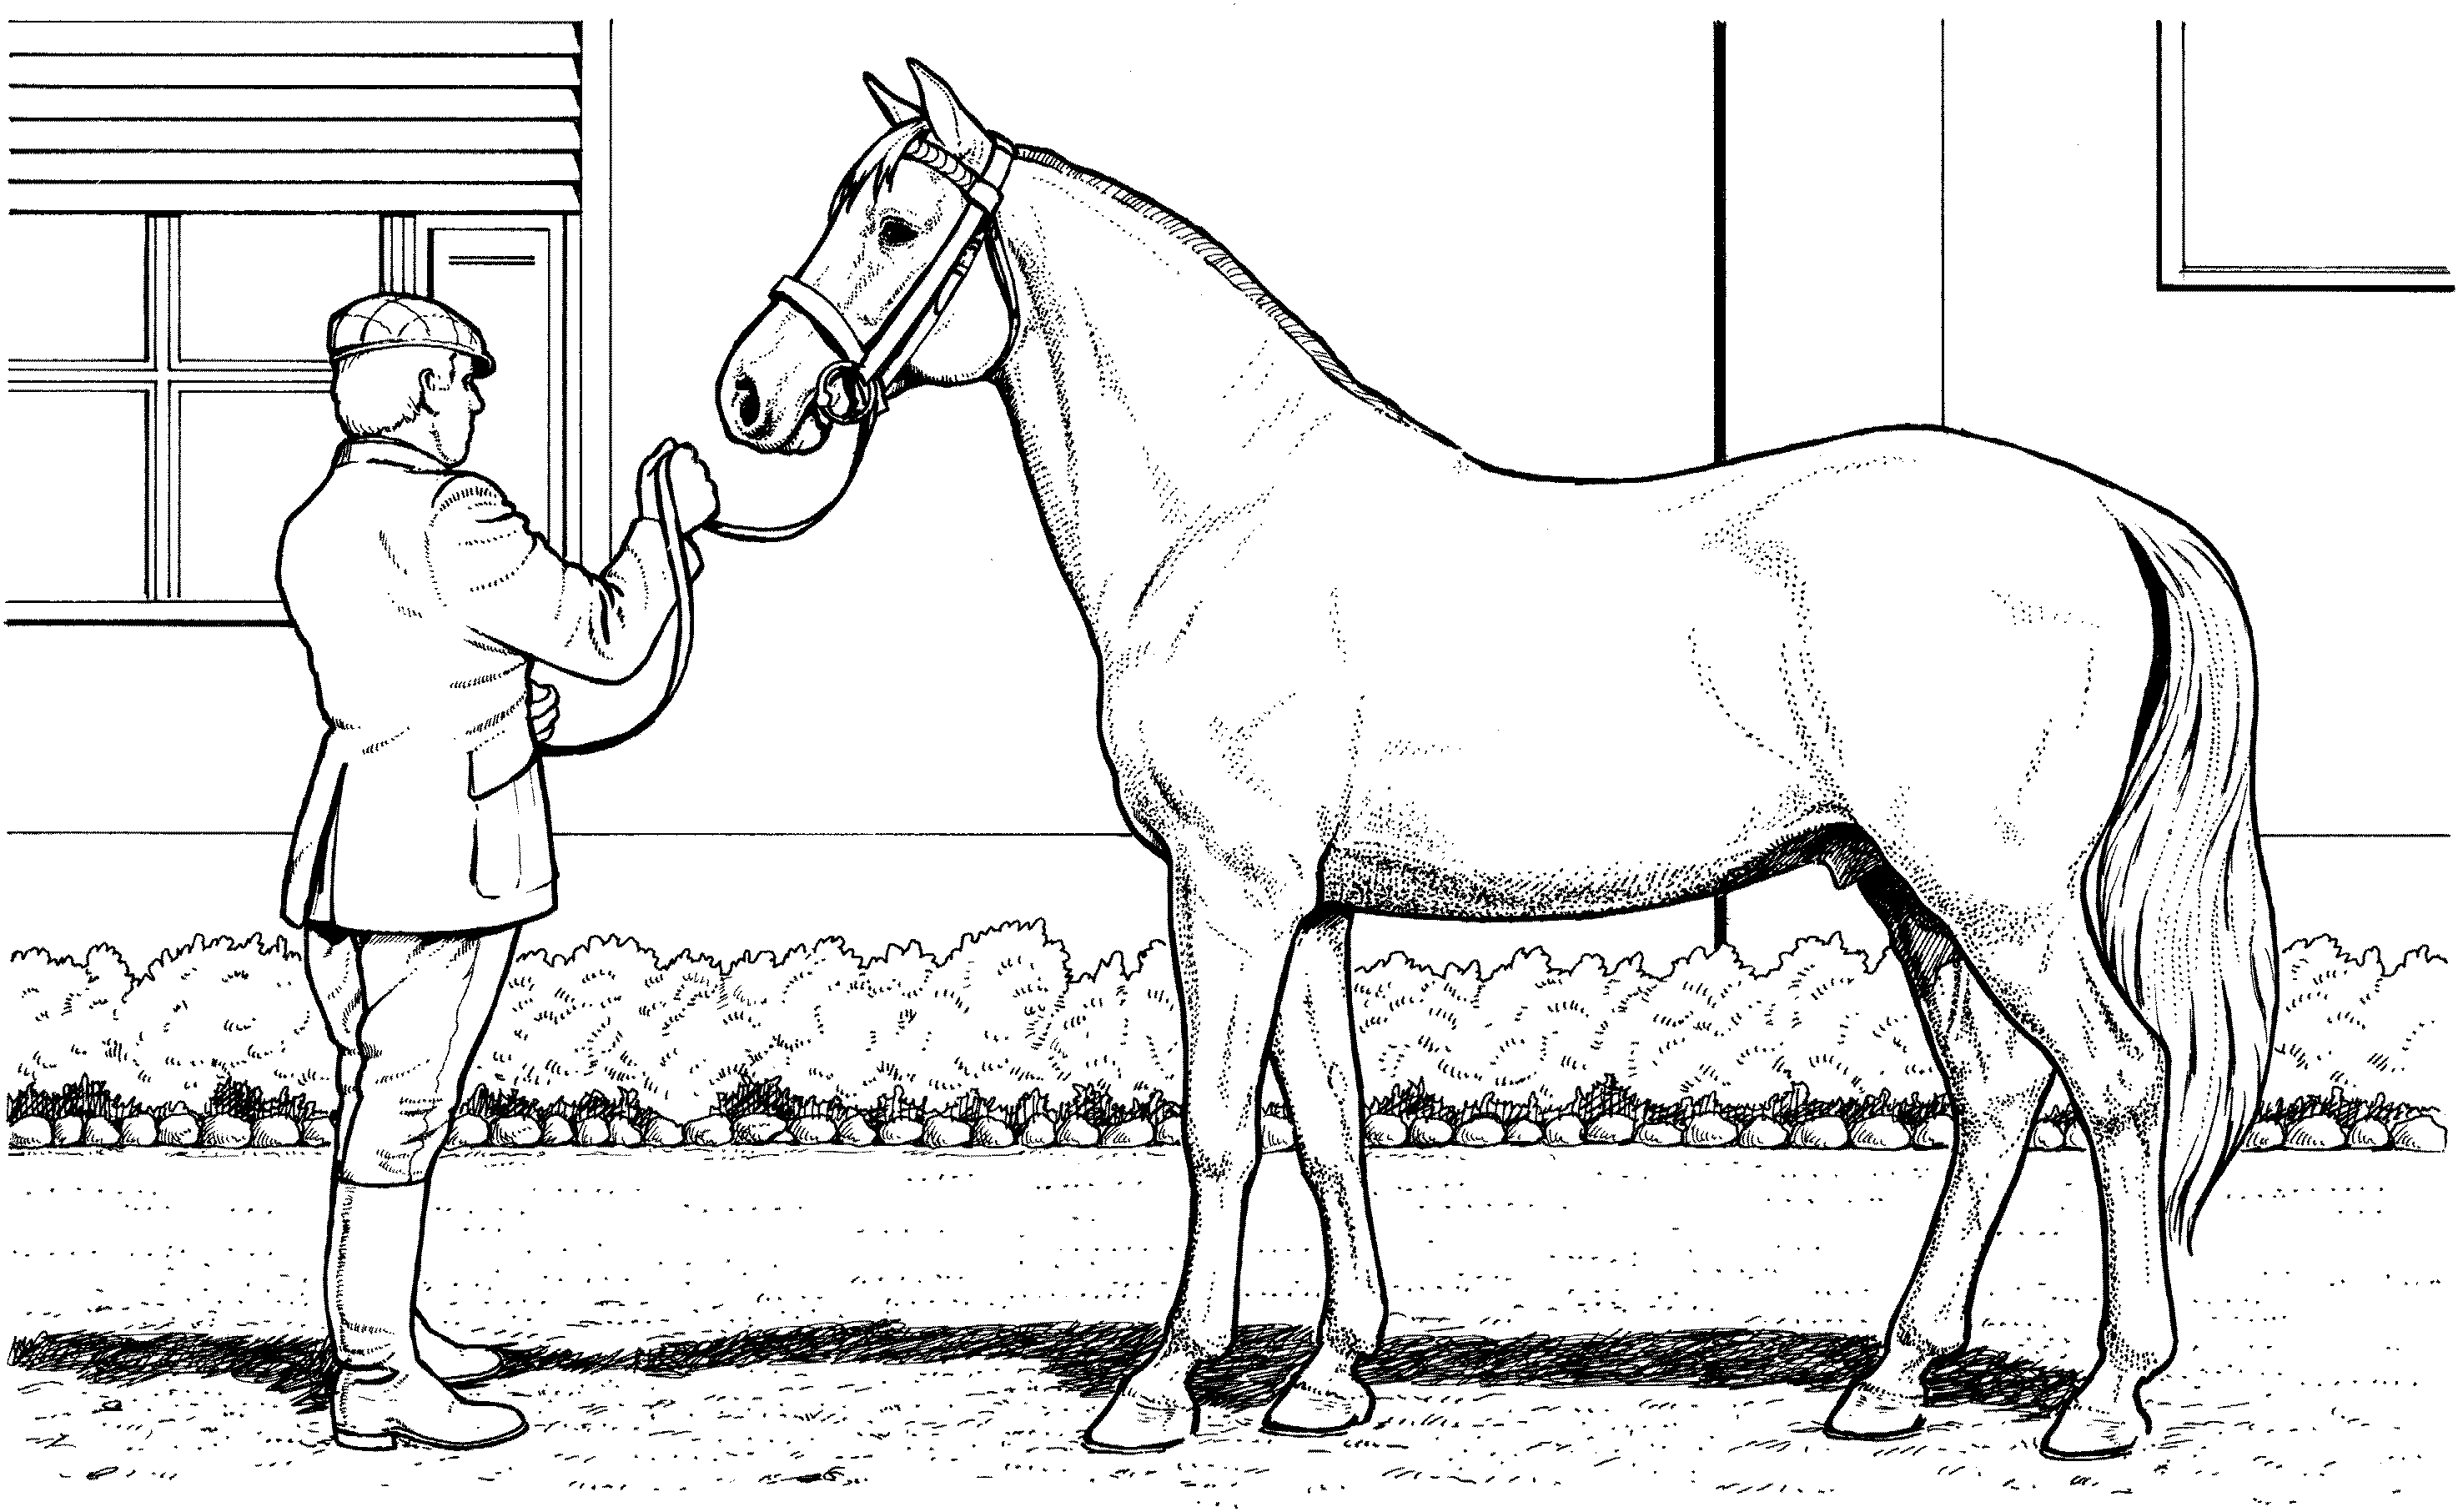 Grazing Horse Coloring Page